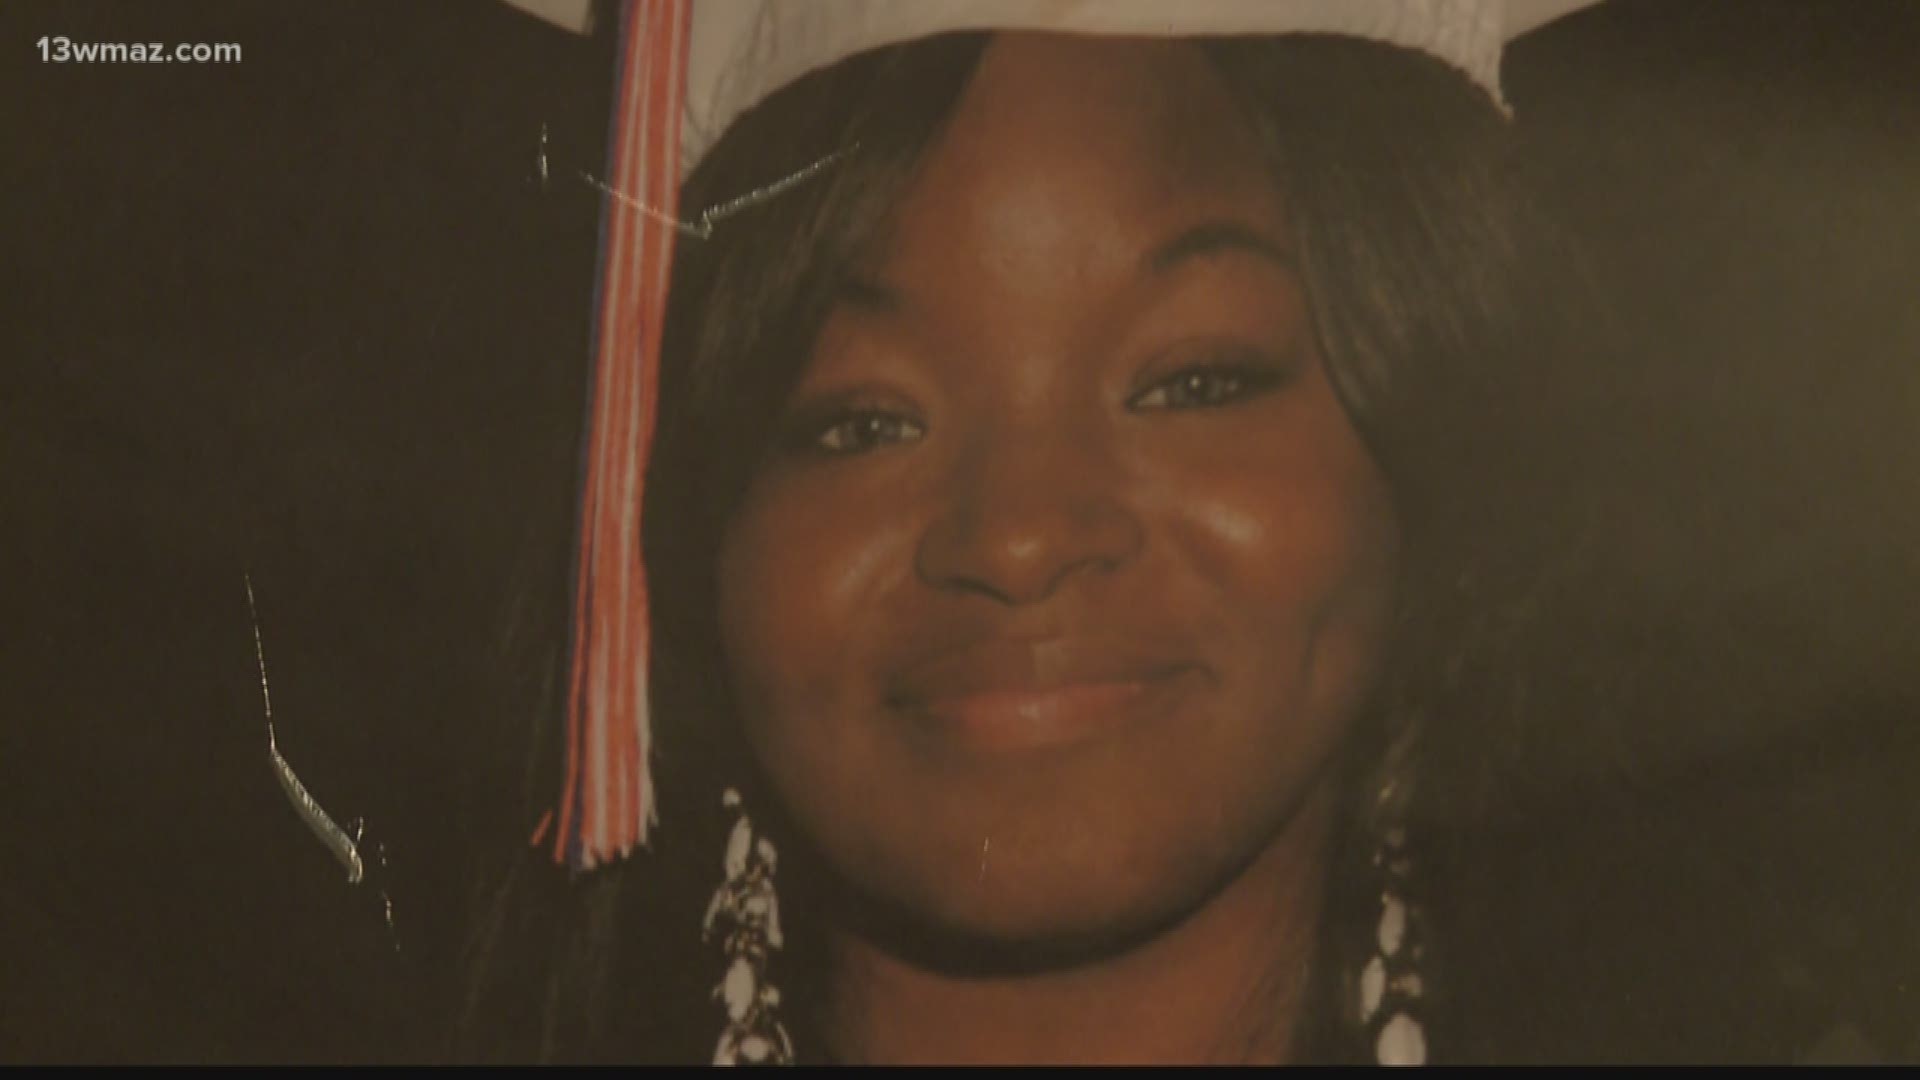 Shar'Bora Daniels was shot and killed in her own home in 2012. She was just 18 years old, and her family is still looking for answers.